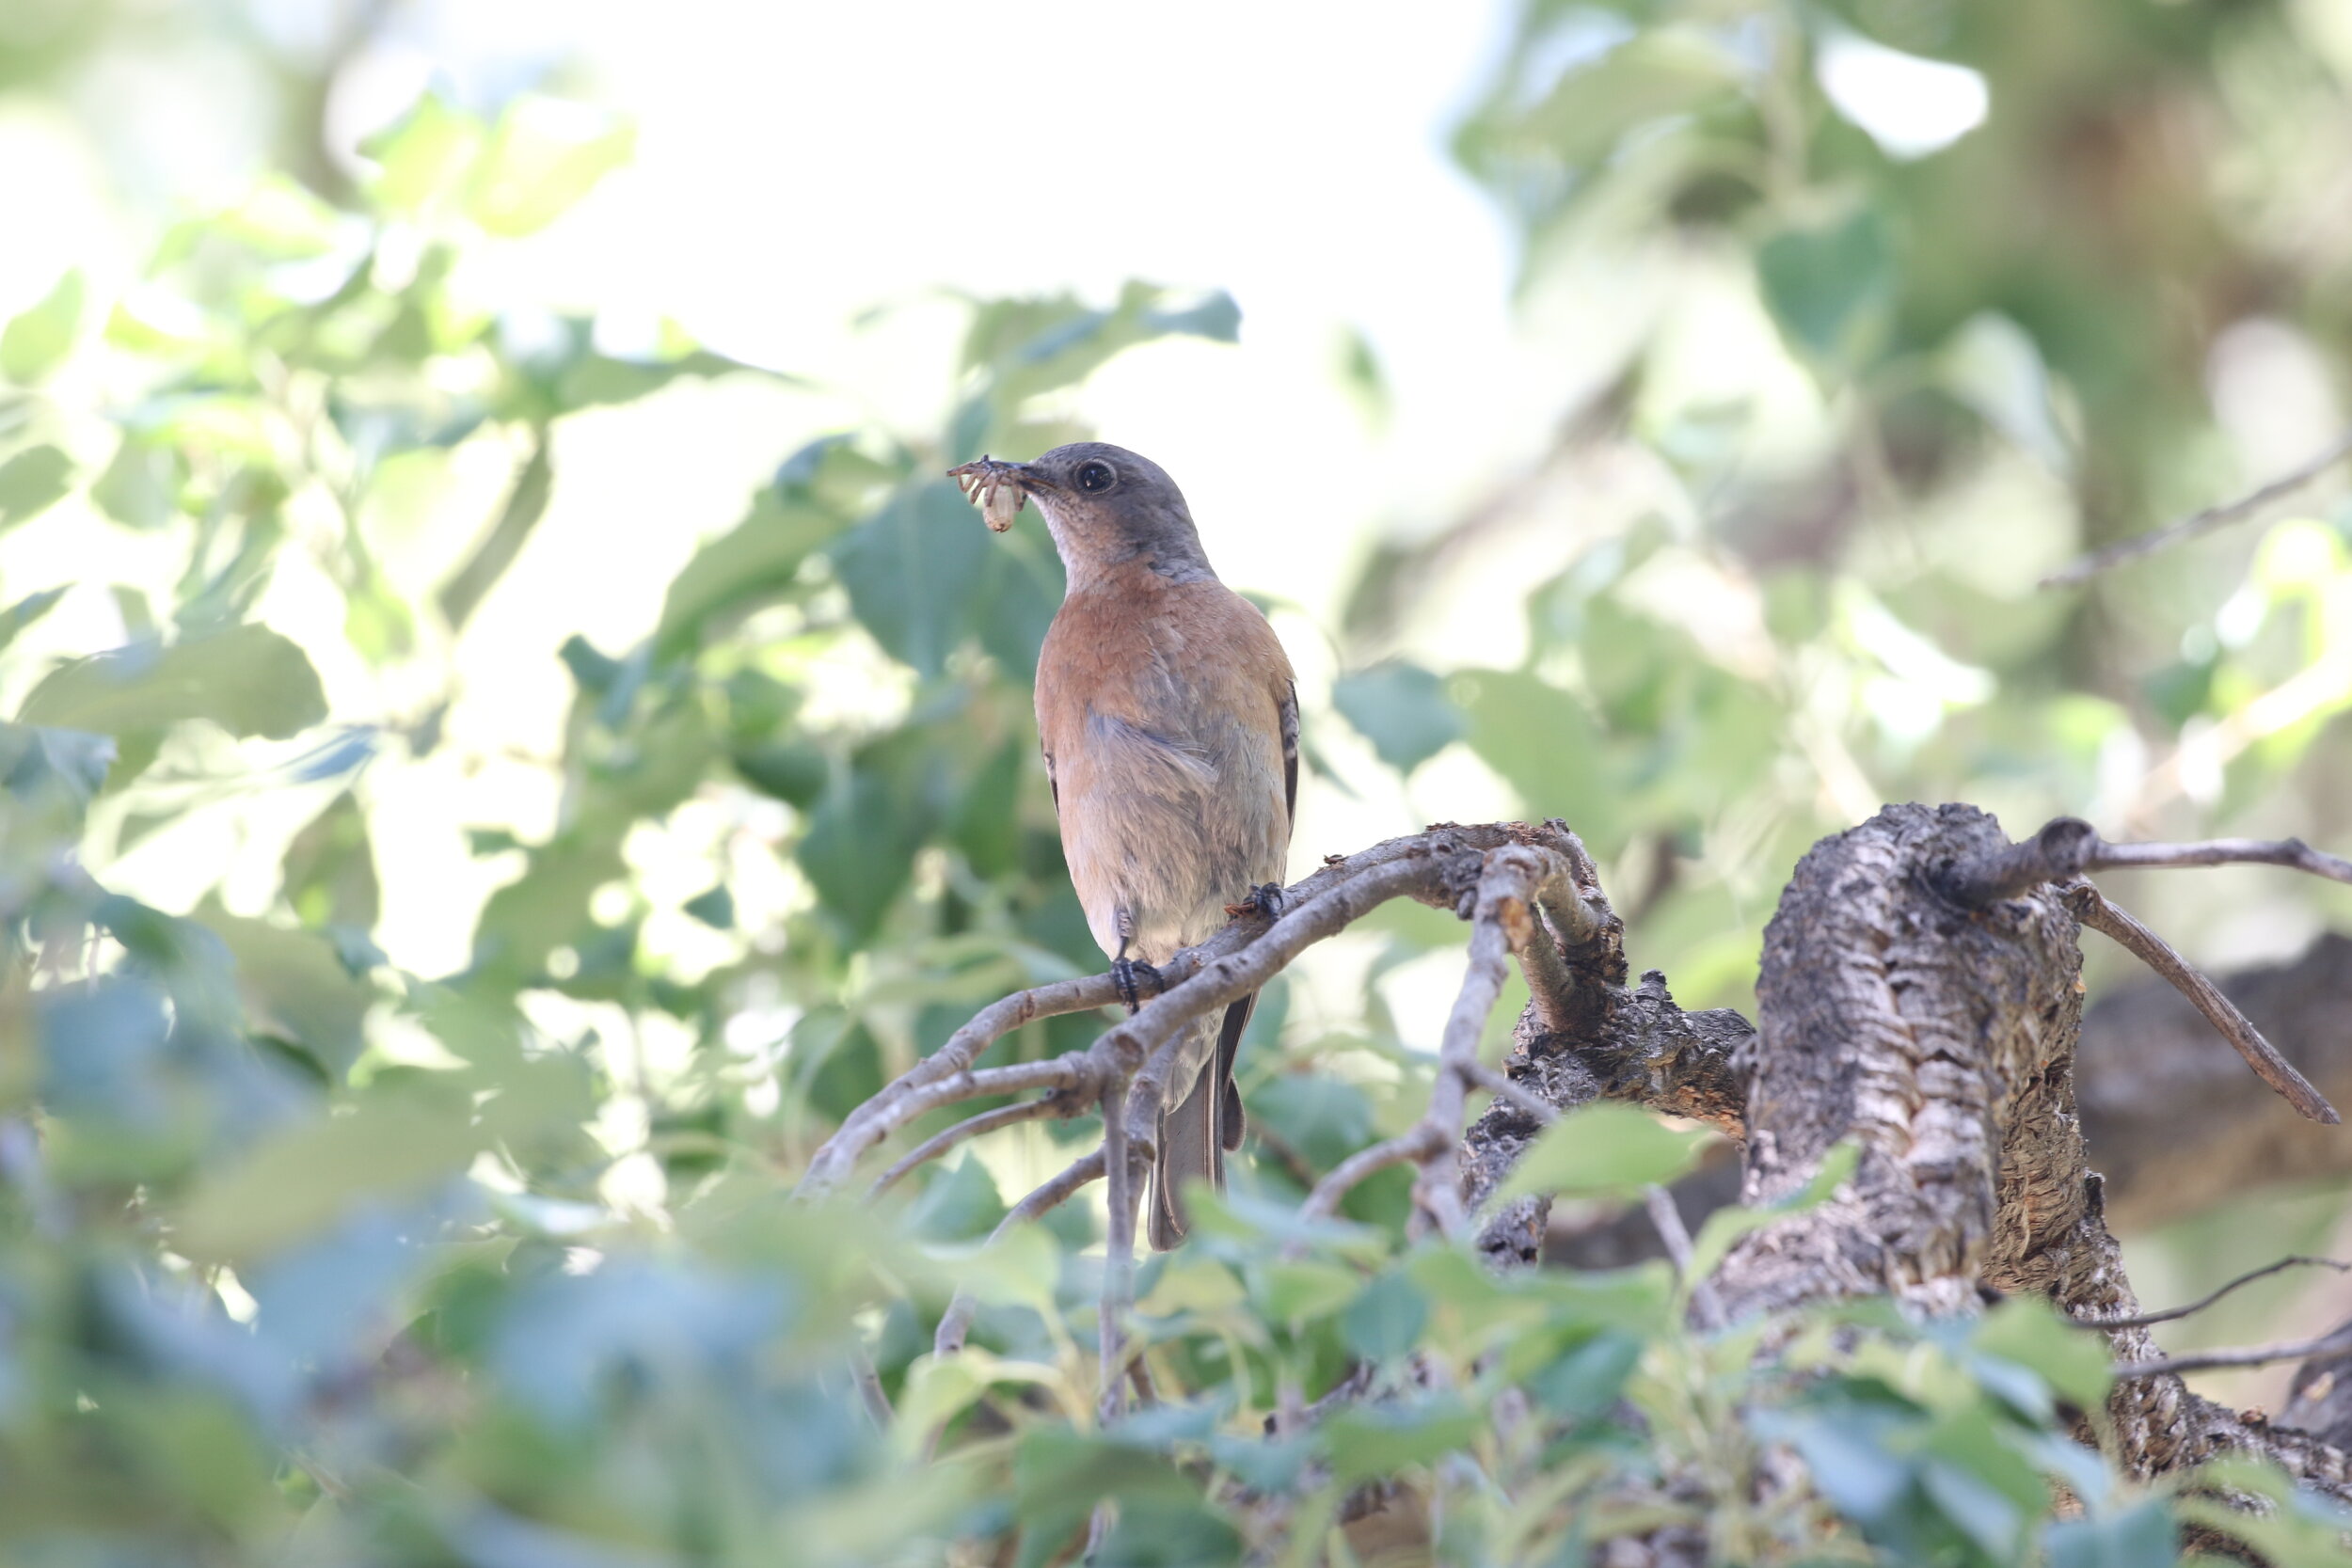 Small brown bird on a branch eating grub